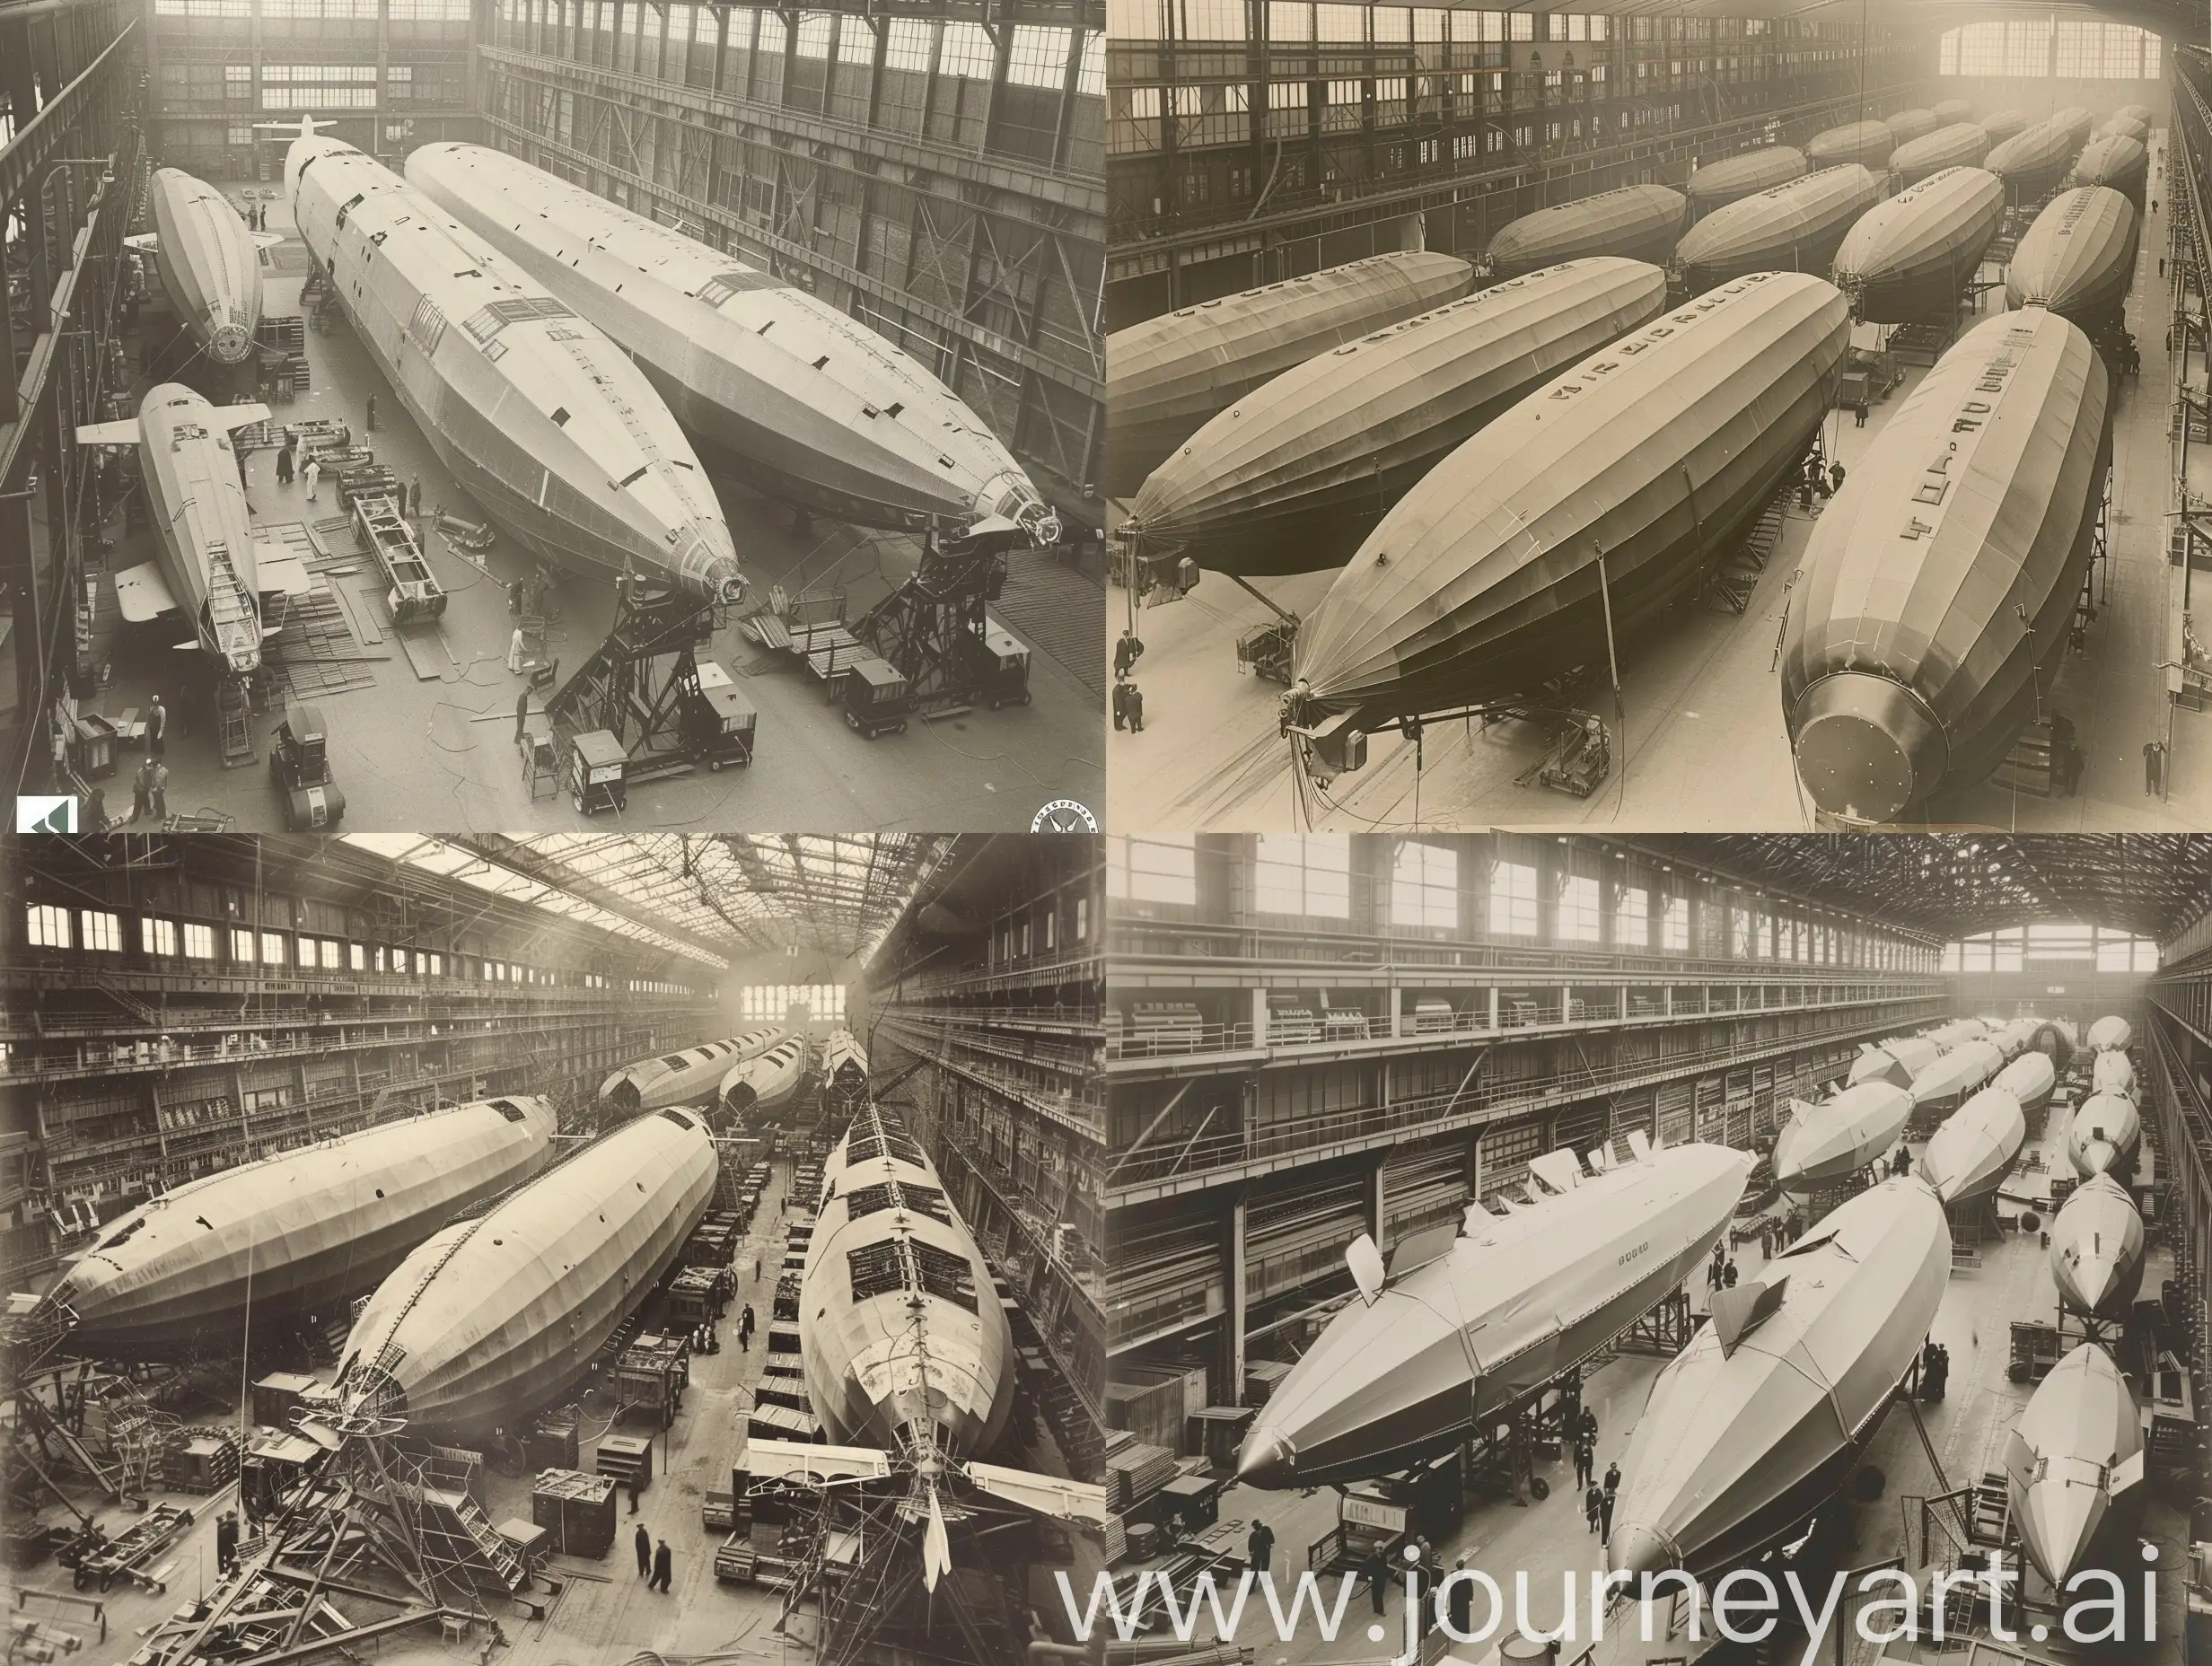 1933, old photo, multiple airship parts being assembled within in large hangar like factory to make an airship, detailed, 